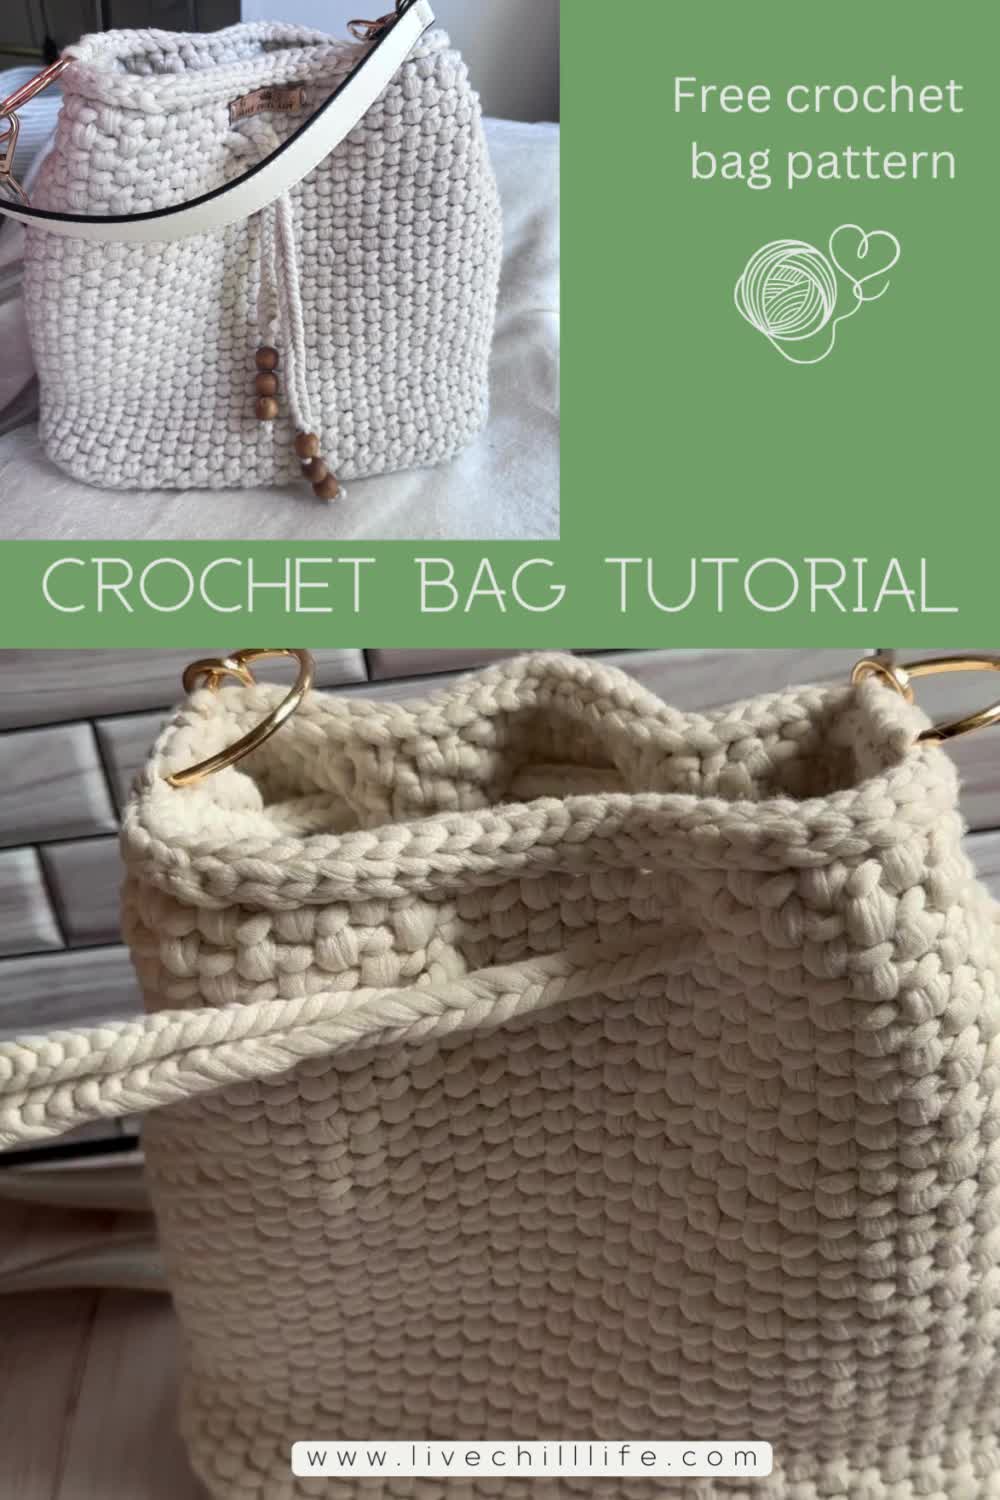 This may contain: the crochet bag pattern is shown with instructions to make it look like they have been